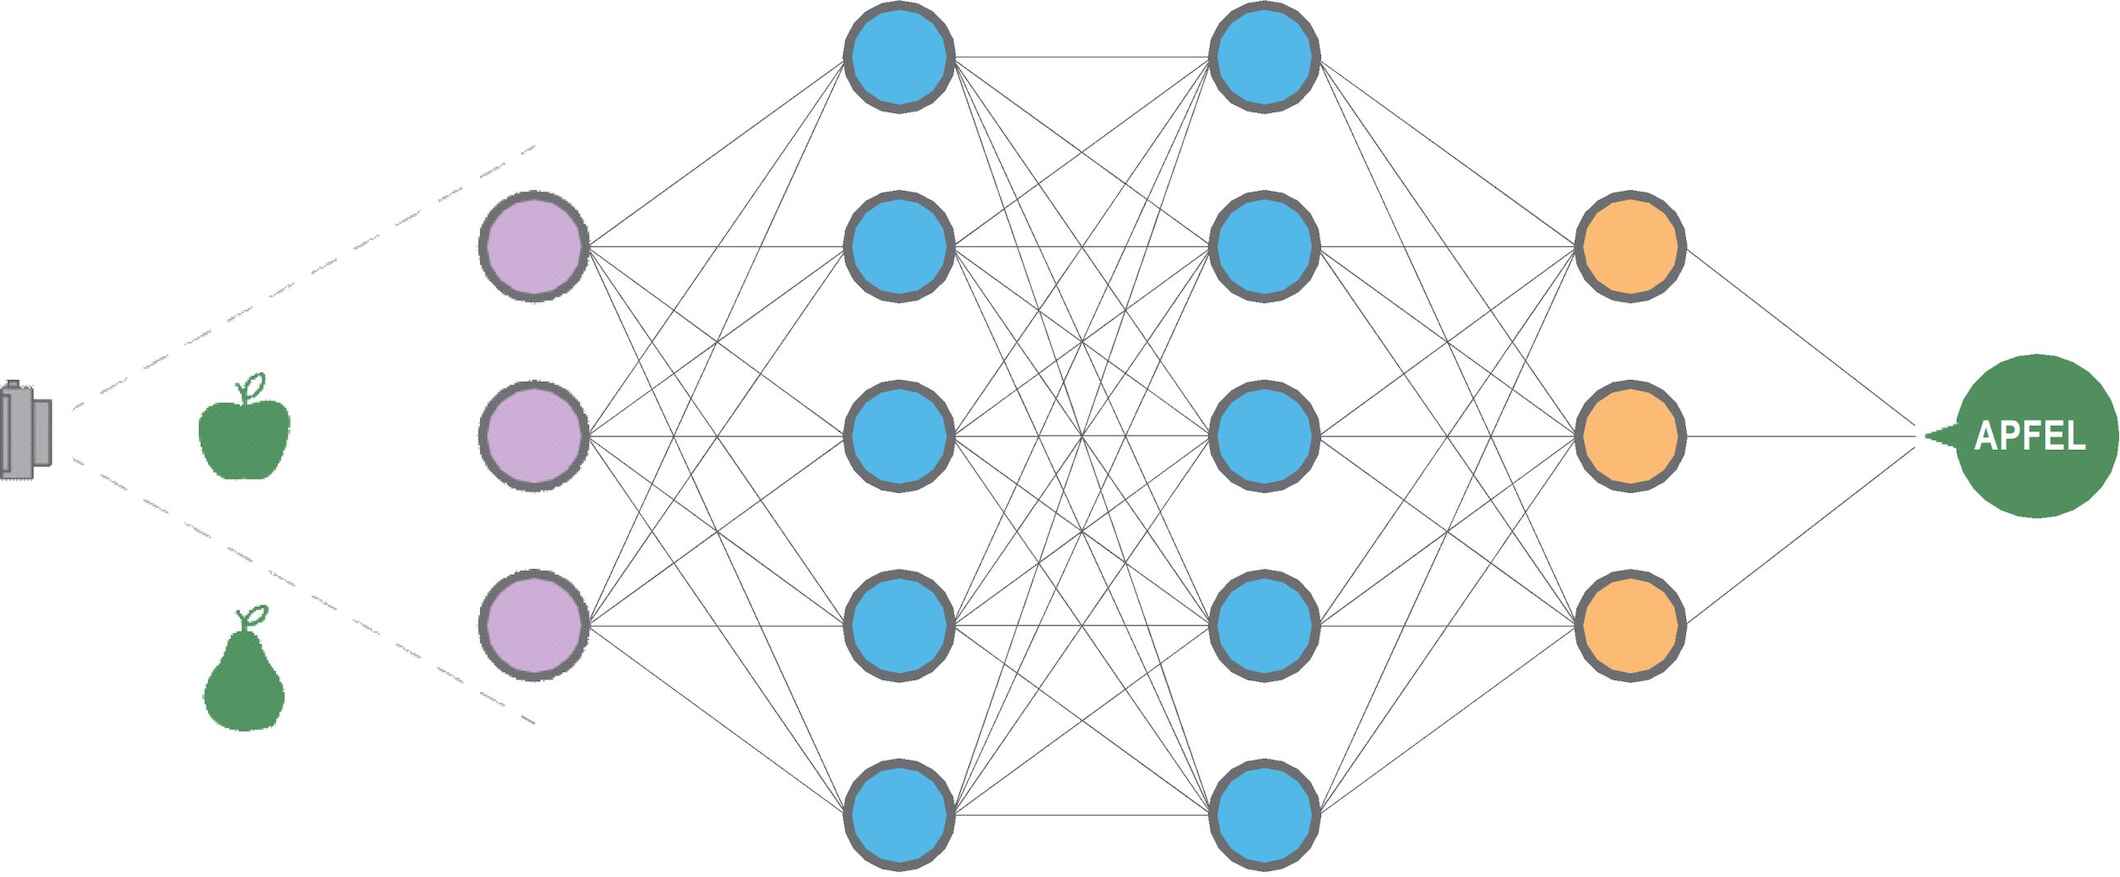 The structure of neural networks remotely resembles that of the human brain. They are capable of learning thanks to their networked ›neurons.‹ If a programmer successively shows the network many thousands of photos of different apples and pears, it will also be able after the conclusion of training to distinguish apples and pears in unfamiliar photos.